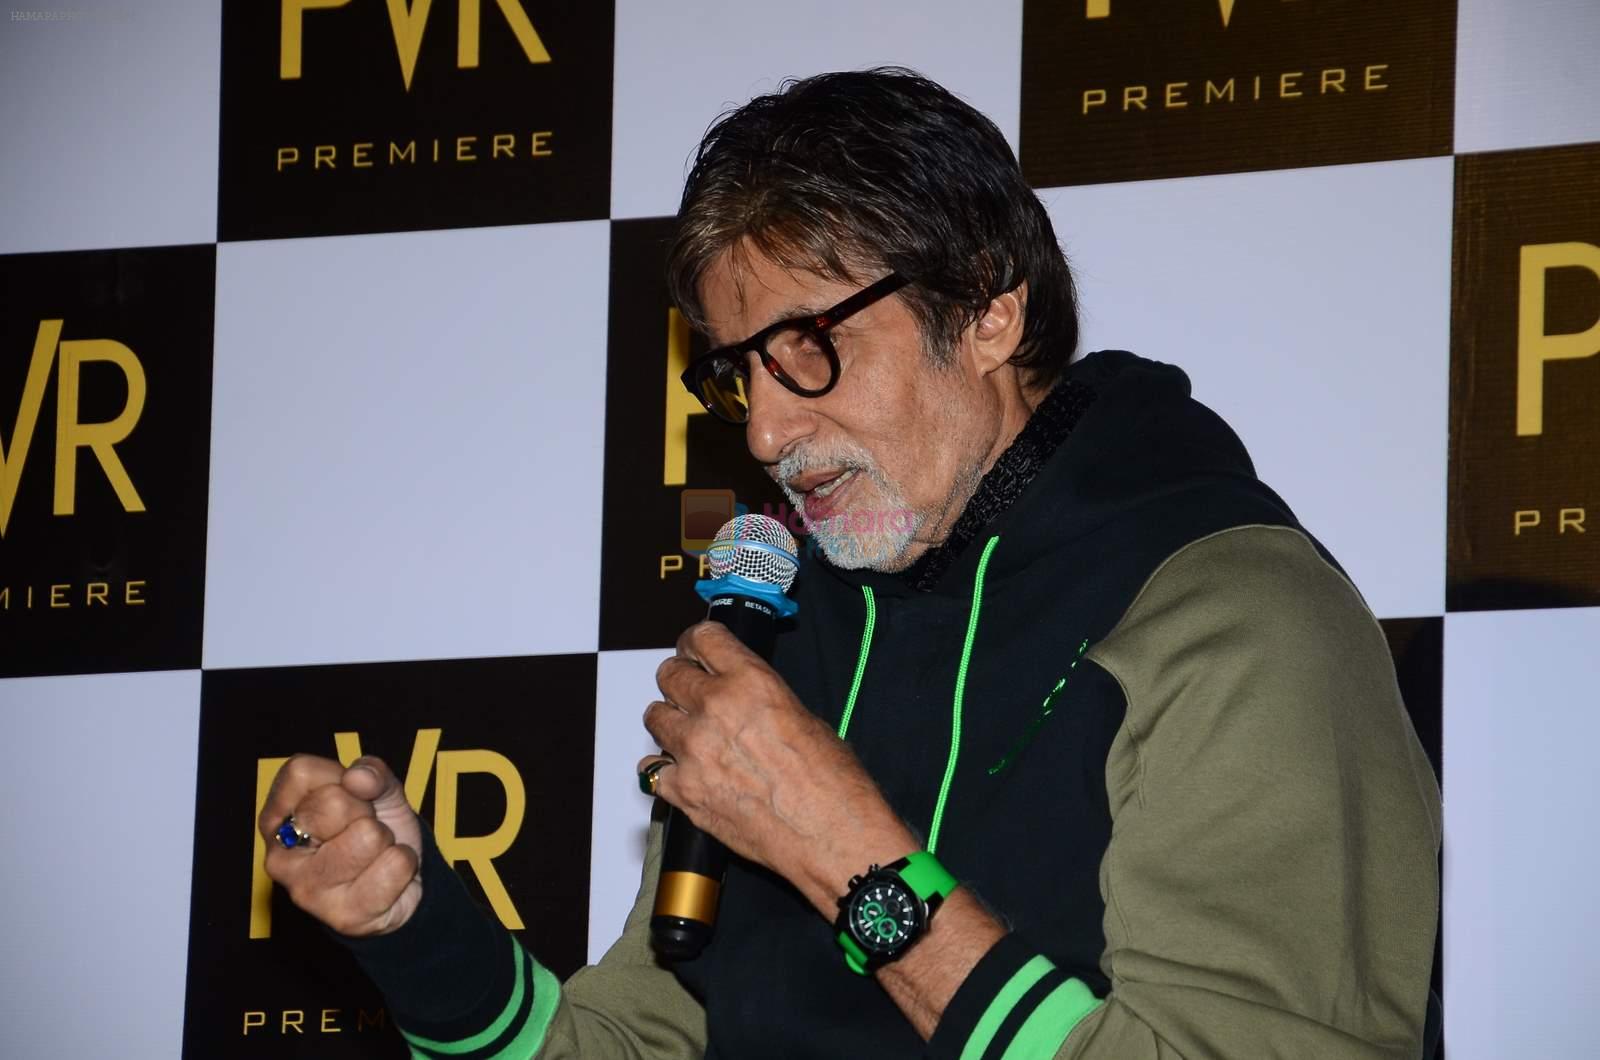 Amitabh Bachchan at Sholay 40 years celebrations press meet in PVR, Juhu on 14th Aug 2015